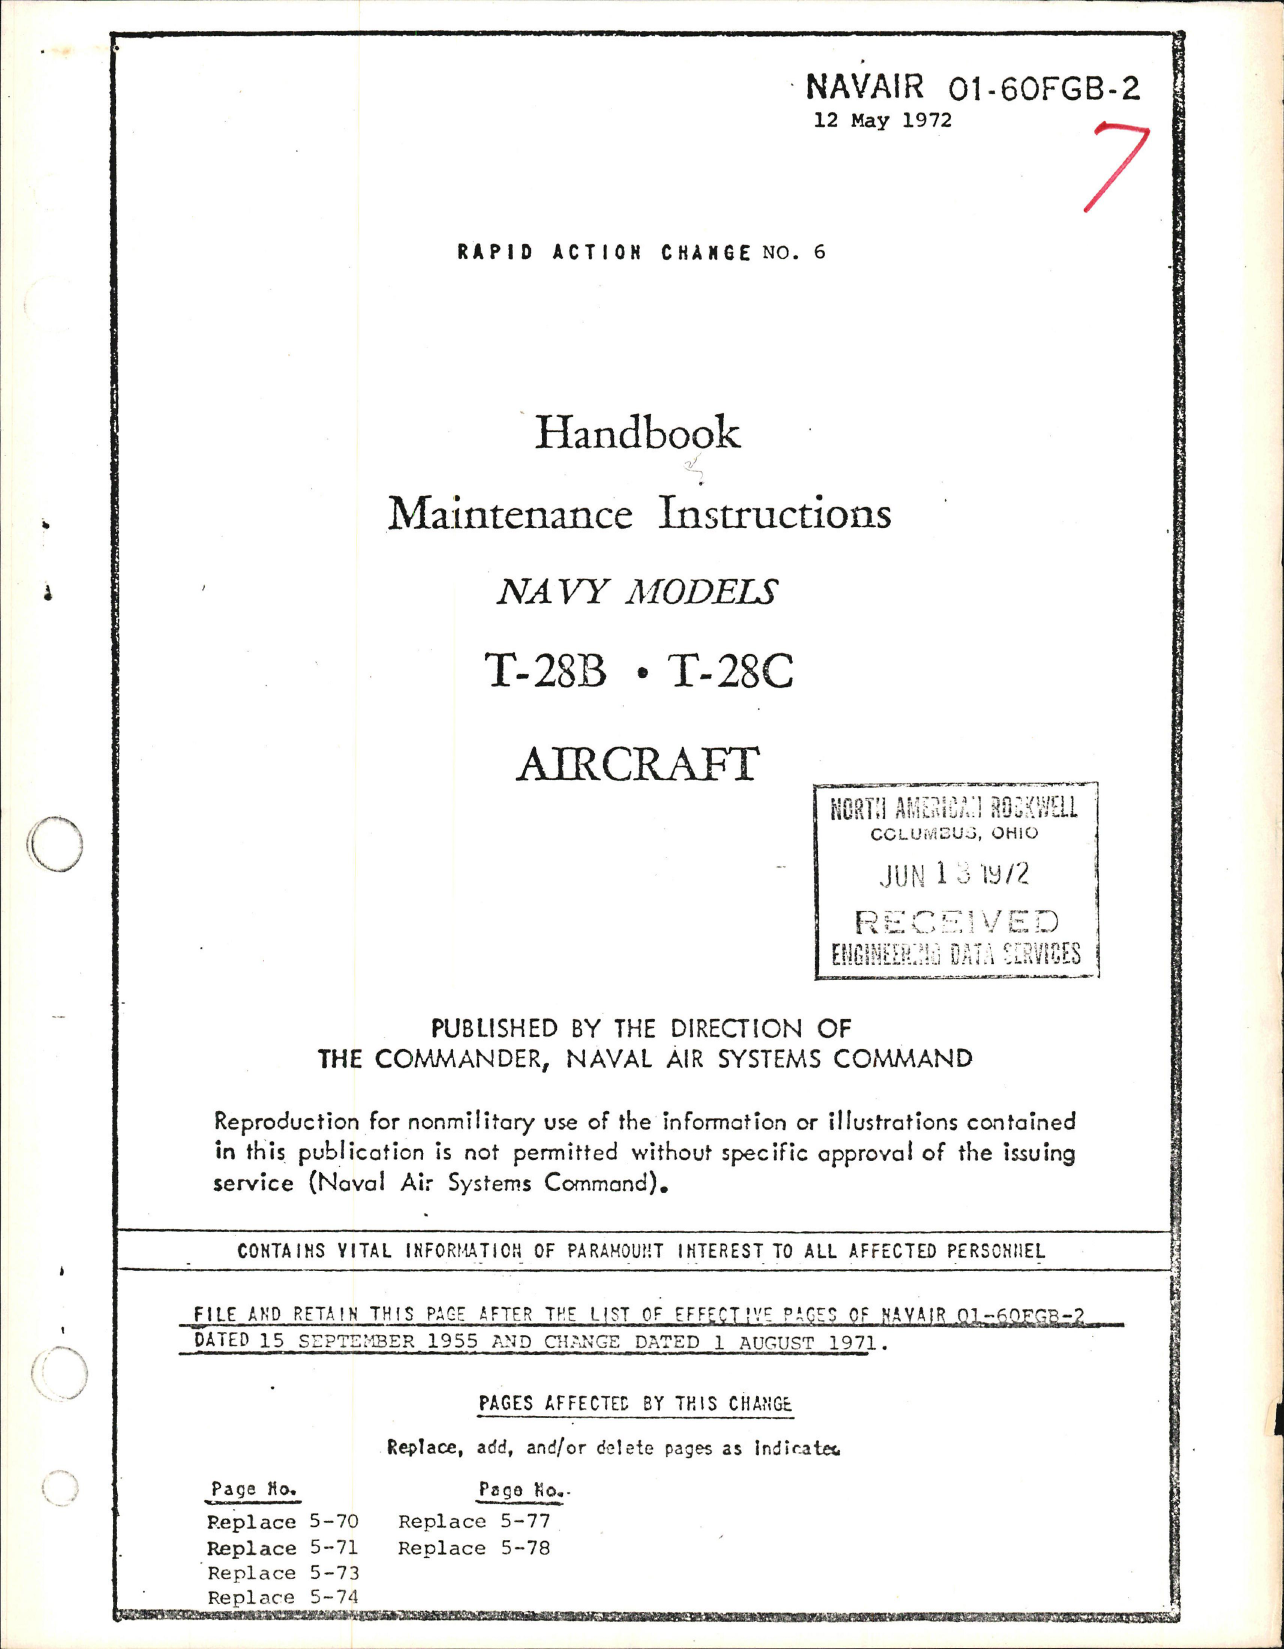 Sample page 1 from AirCorps Library document: Maintenance Instructions for T-28B and T-28C